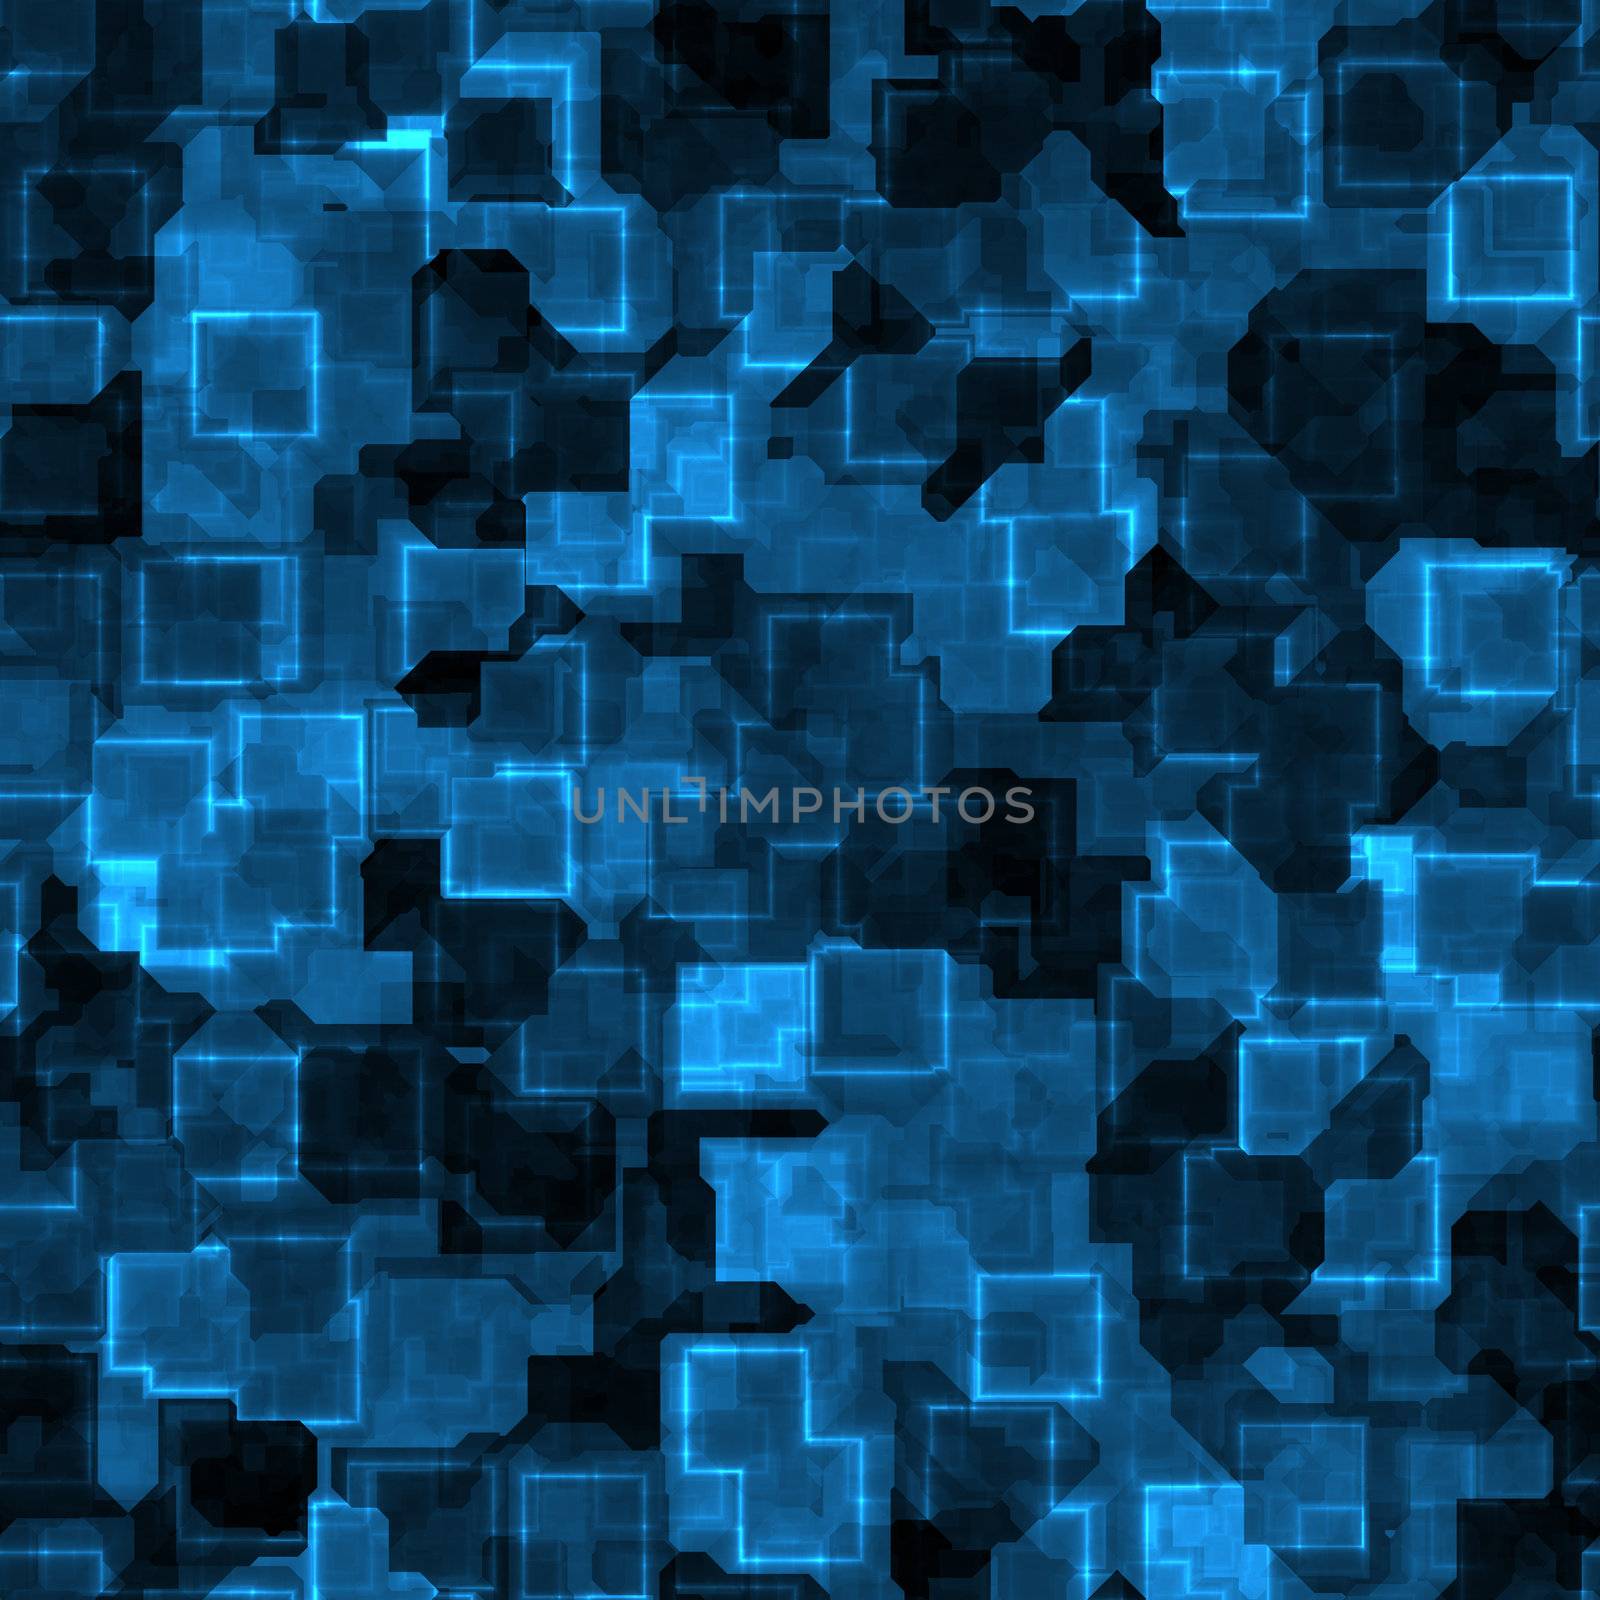 cyber grunge background, will tile seamlessly as a pattern

